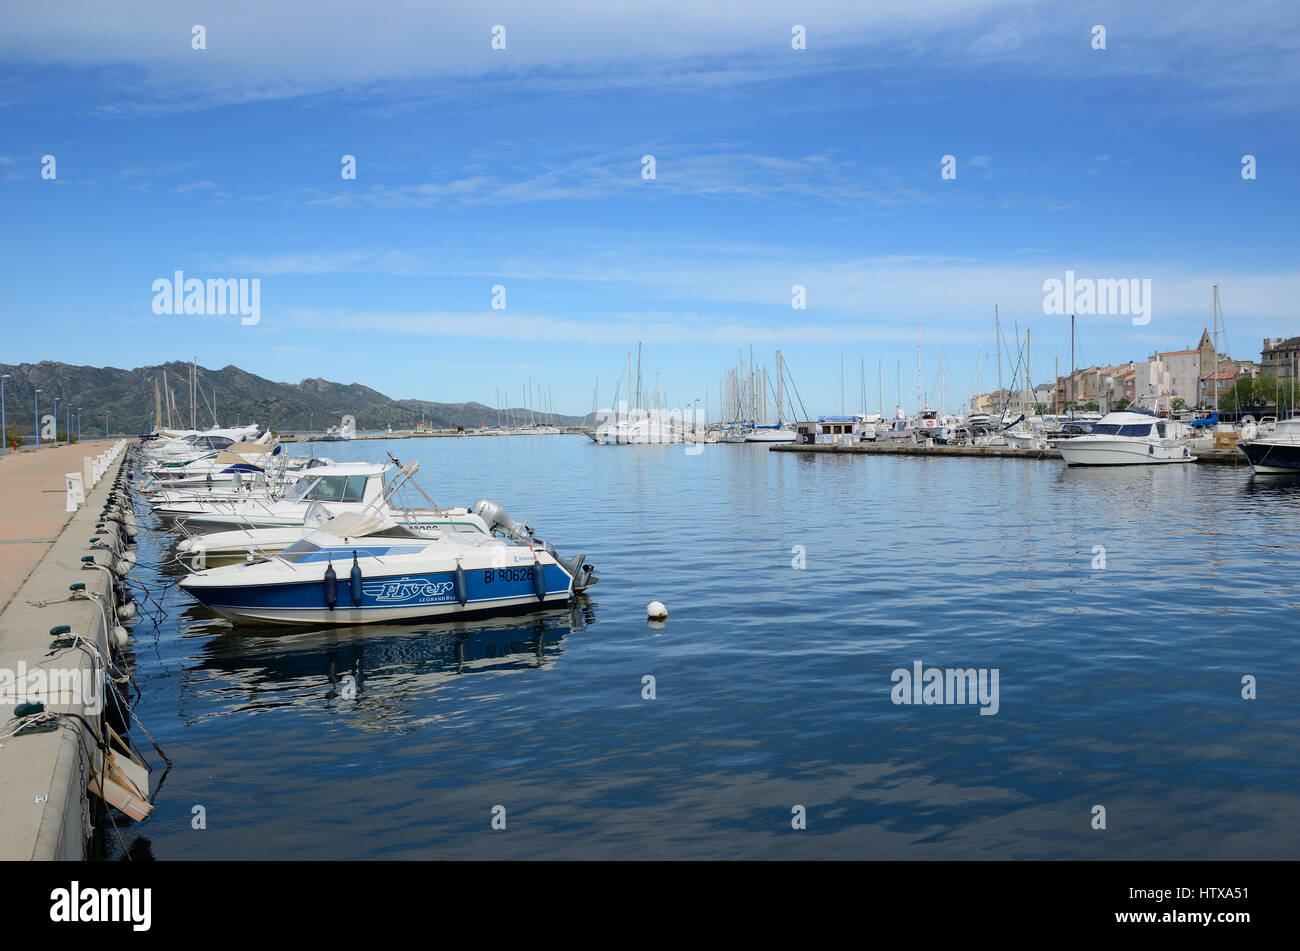 Saint-Florent is a fishing port located near the gulf of the same name. Today, it is a popular summer vacation spot for many tourists. Stock Photo